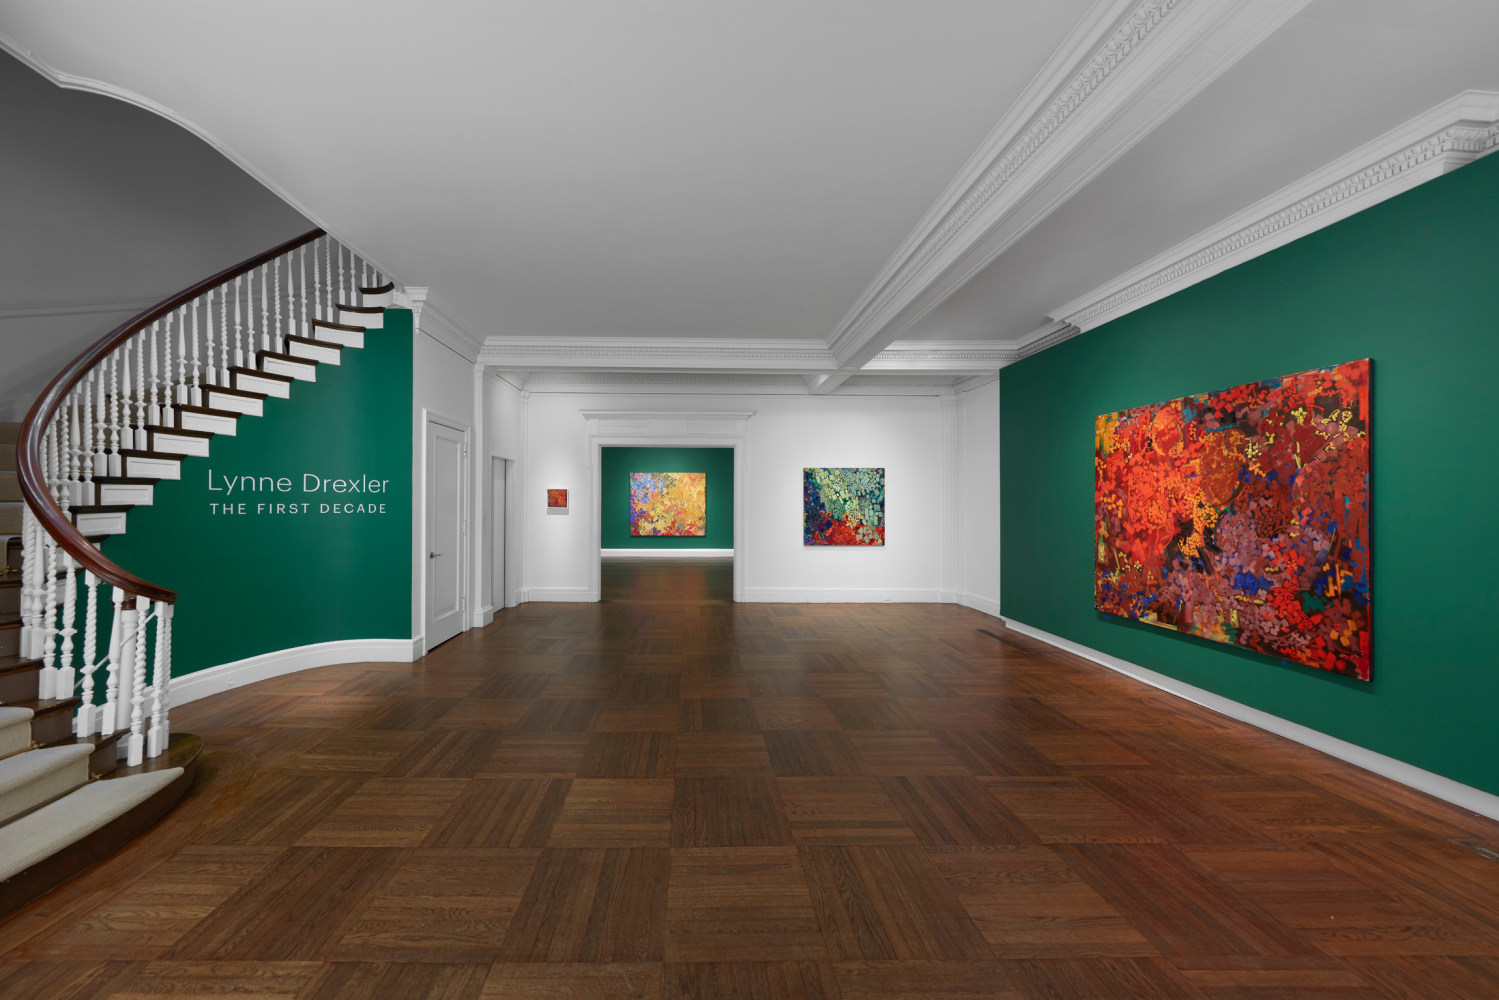 Installation view of Lynne Drexler: The First Decade, in collaboration with Berry Campbell Gallery, October 27 - December 17, 2022,&amp;nbsp;&amp;copy; The Estate of Lynne Drexler. Photography by Tom Powel Imaging, Inc.&amp;nbsp;